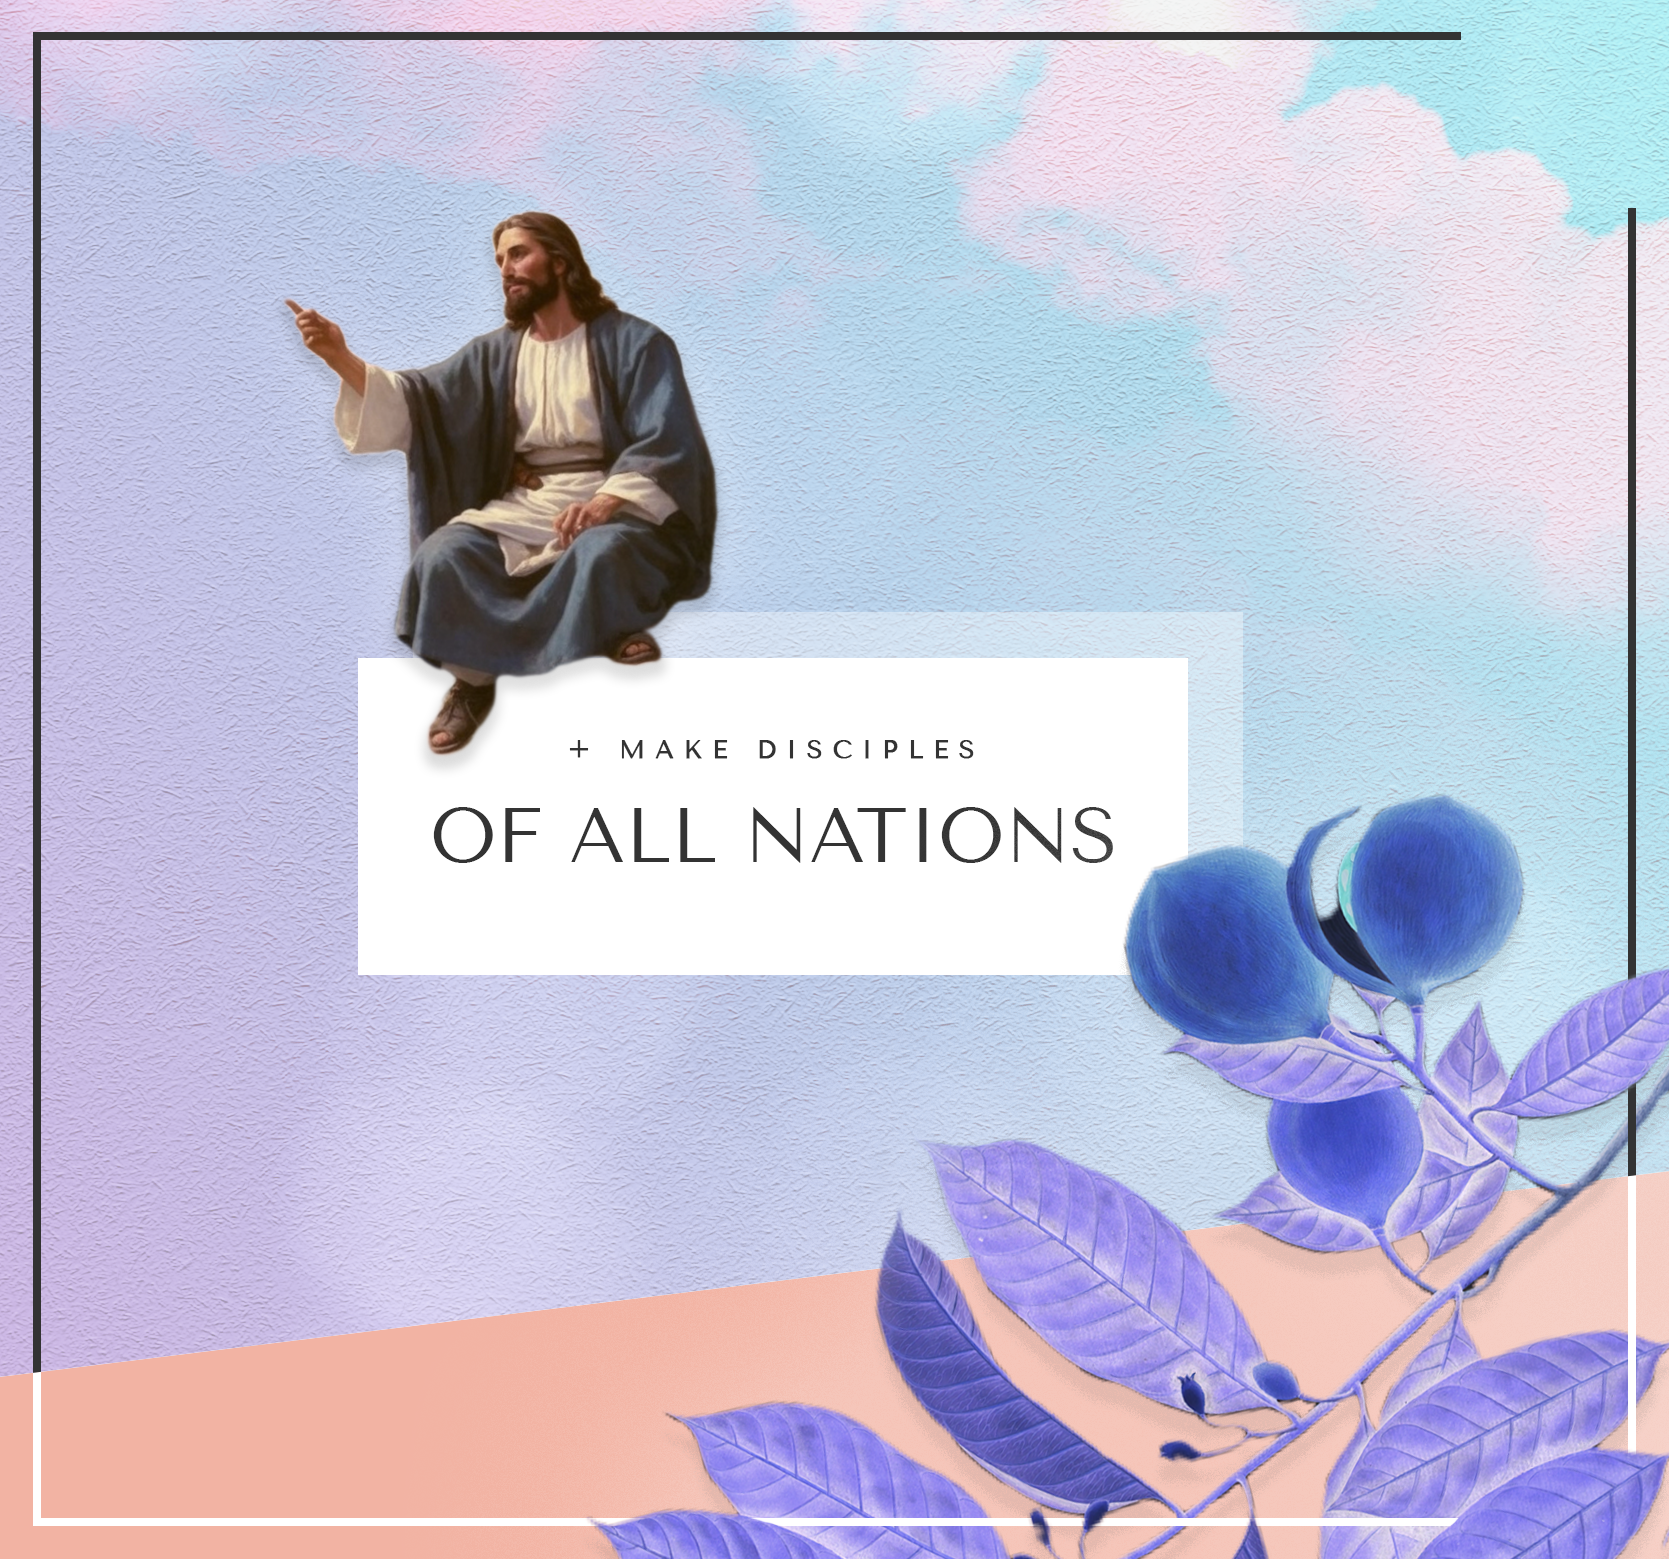 GO and Make Disciples of ALL Nations (with AI [artificial intelligence] art portrait of Jesus teaching the Sermon On the Mount, generated by Midjourney) // Get Served via Crucifly (Apparel, Gospel Music Production, and Services) \\ Faith-Based Freelancing for Christian Churches, Ministries, Non-Profits, Pastors, Influencers, + more!